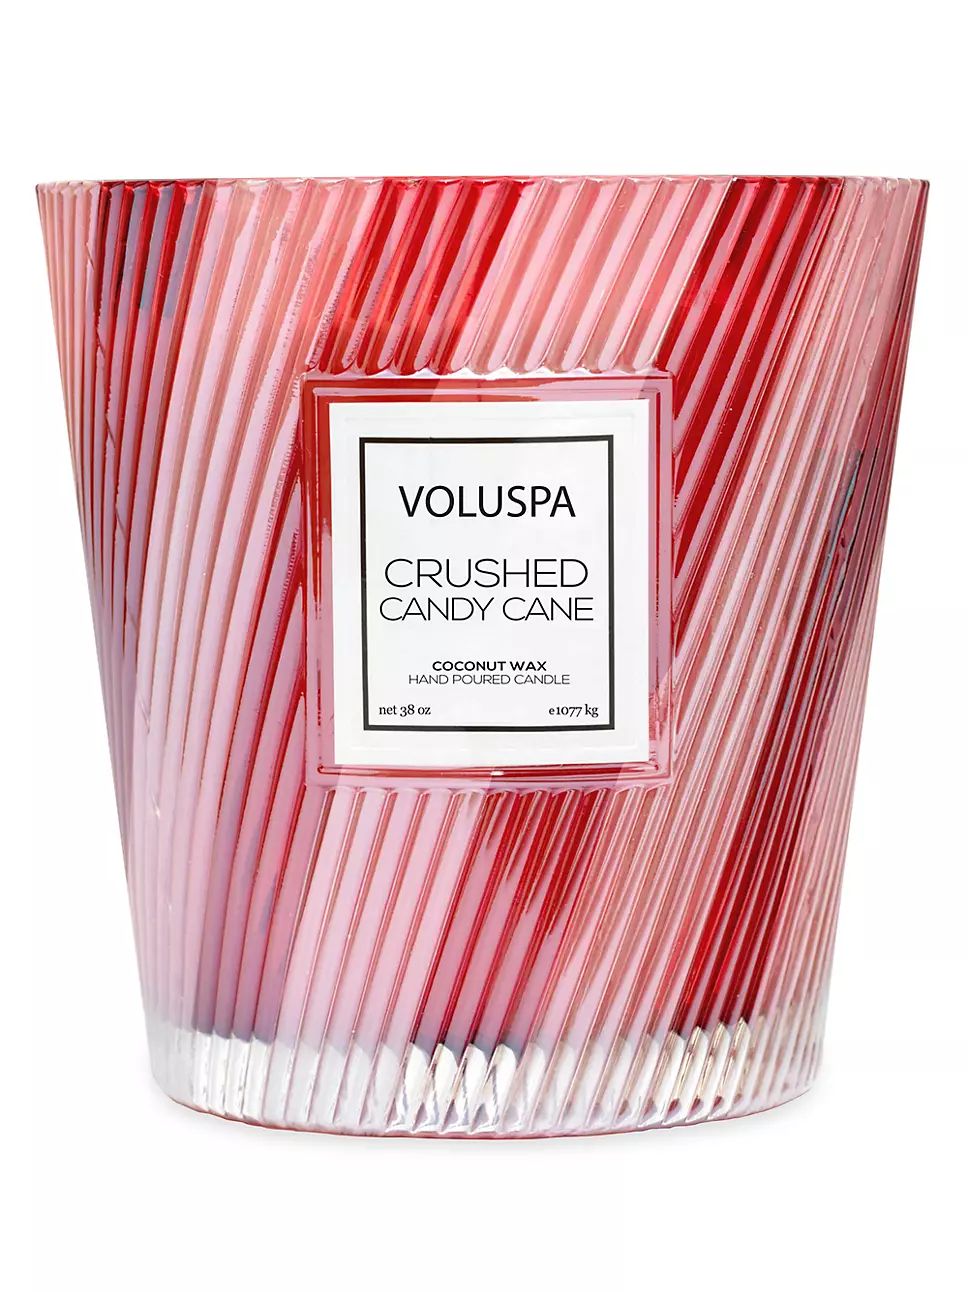 Voluspa Crushed Candy Cane 3-Wick Candle | Saks Fifth Avenue